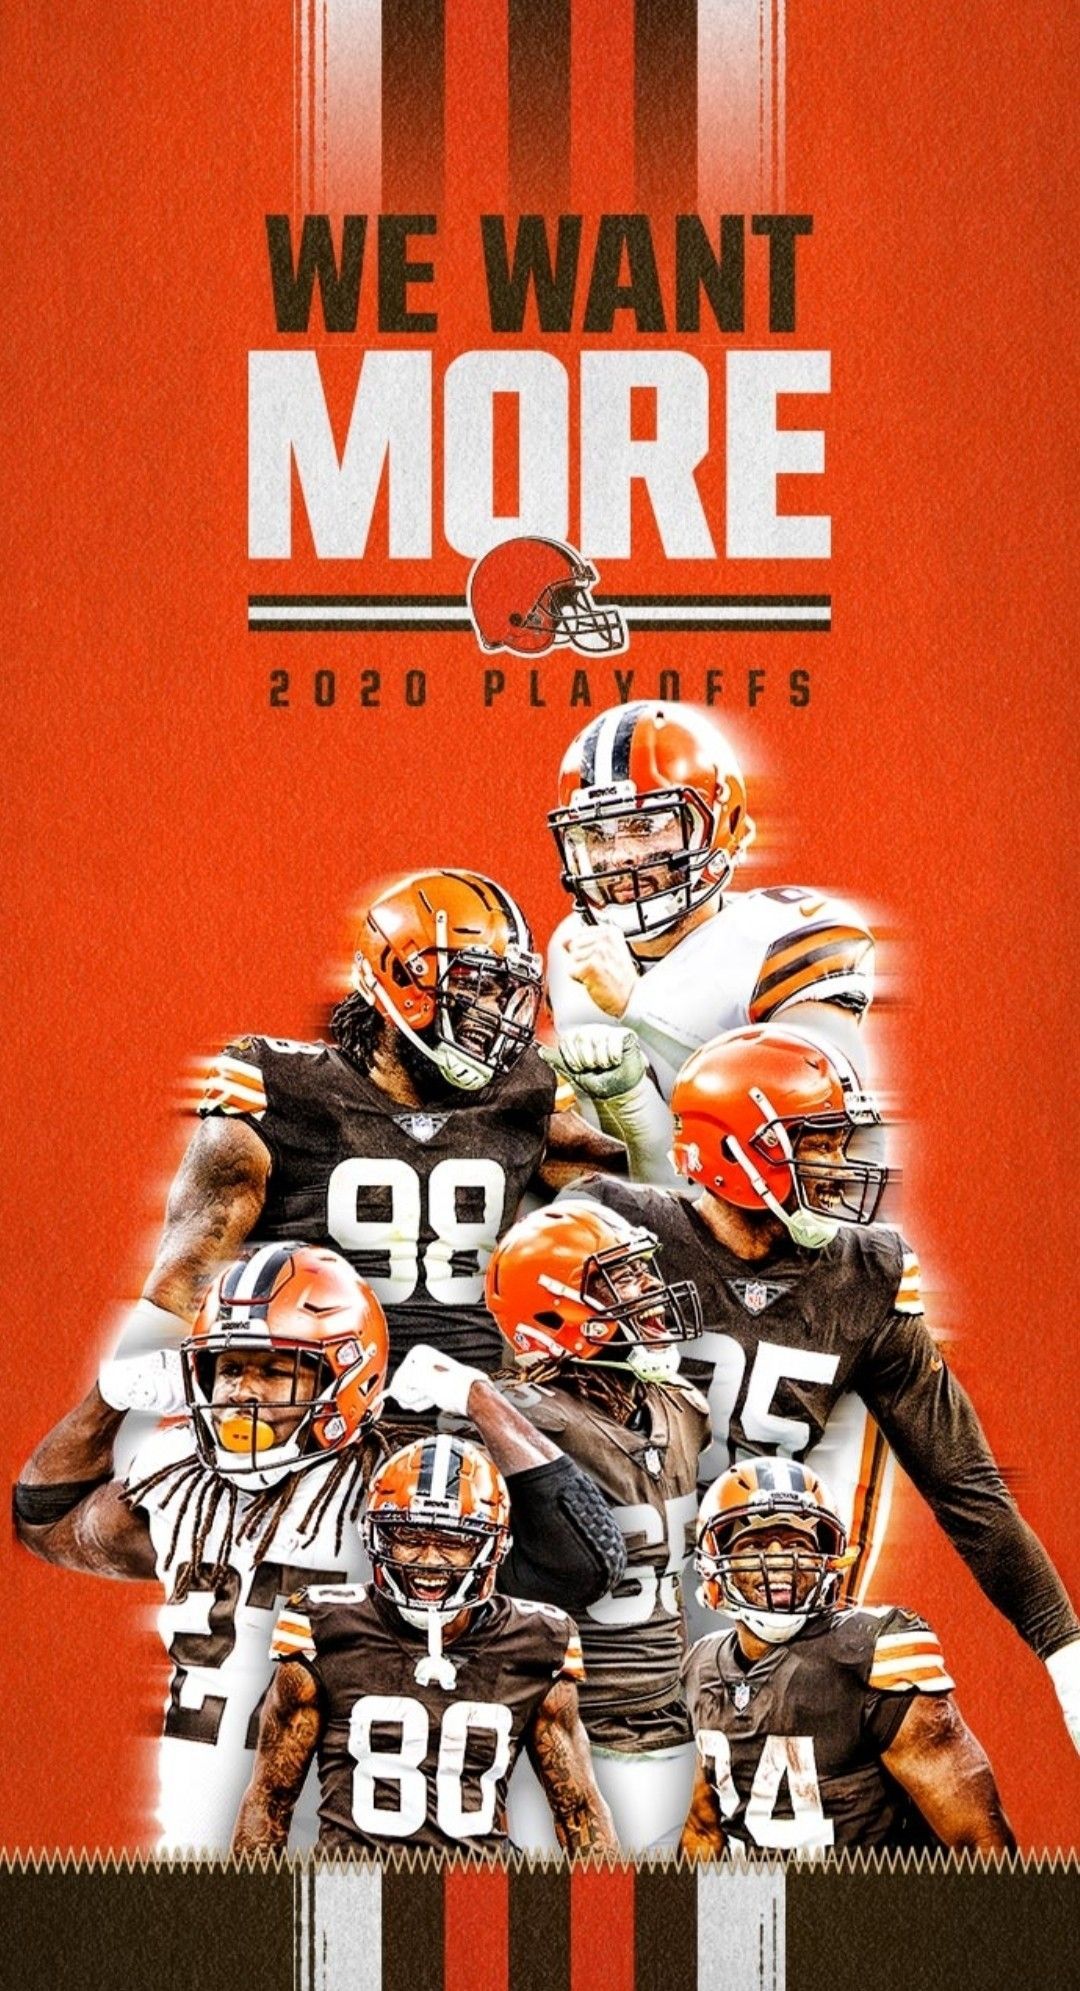 Cleveland Browns We Want More 2020 Playoffs. Cleveland browns wallpaper, Cleveland browns logo, Cleveland browns football